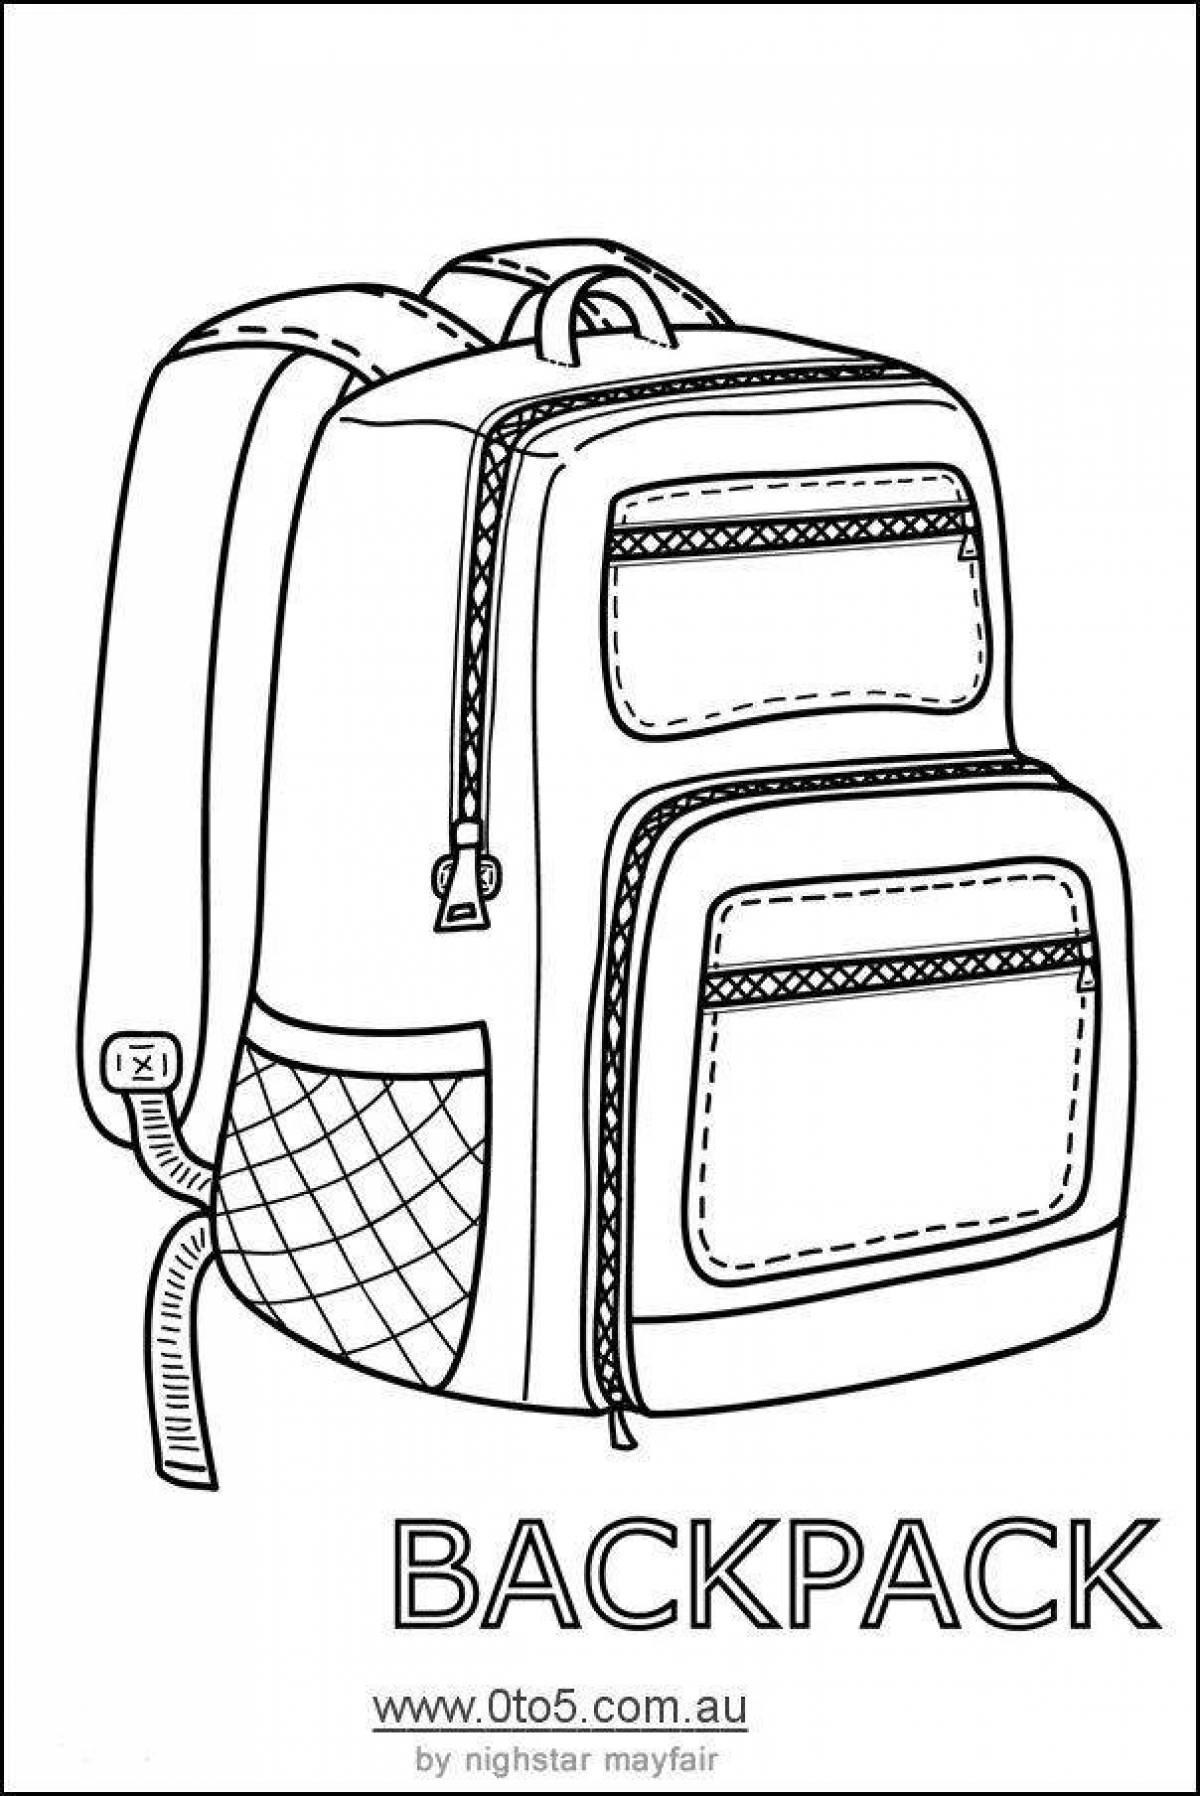 Coloring book dazzling backpack for kids